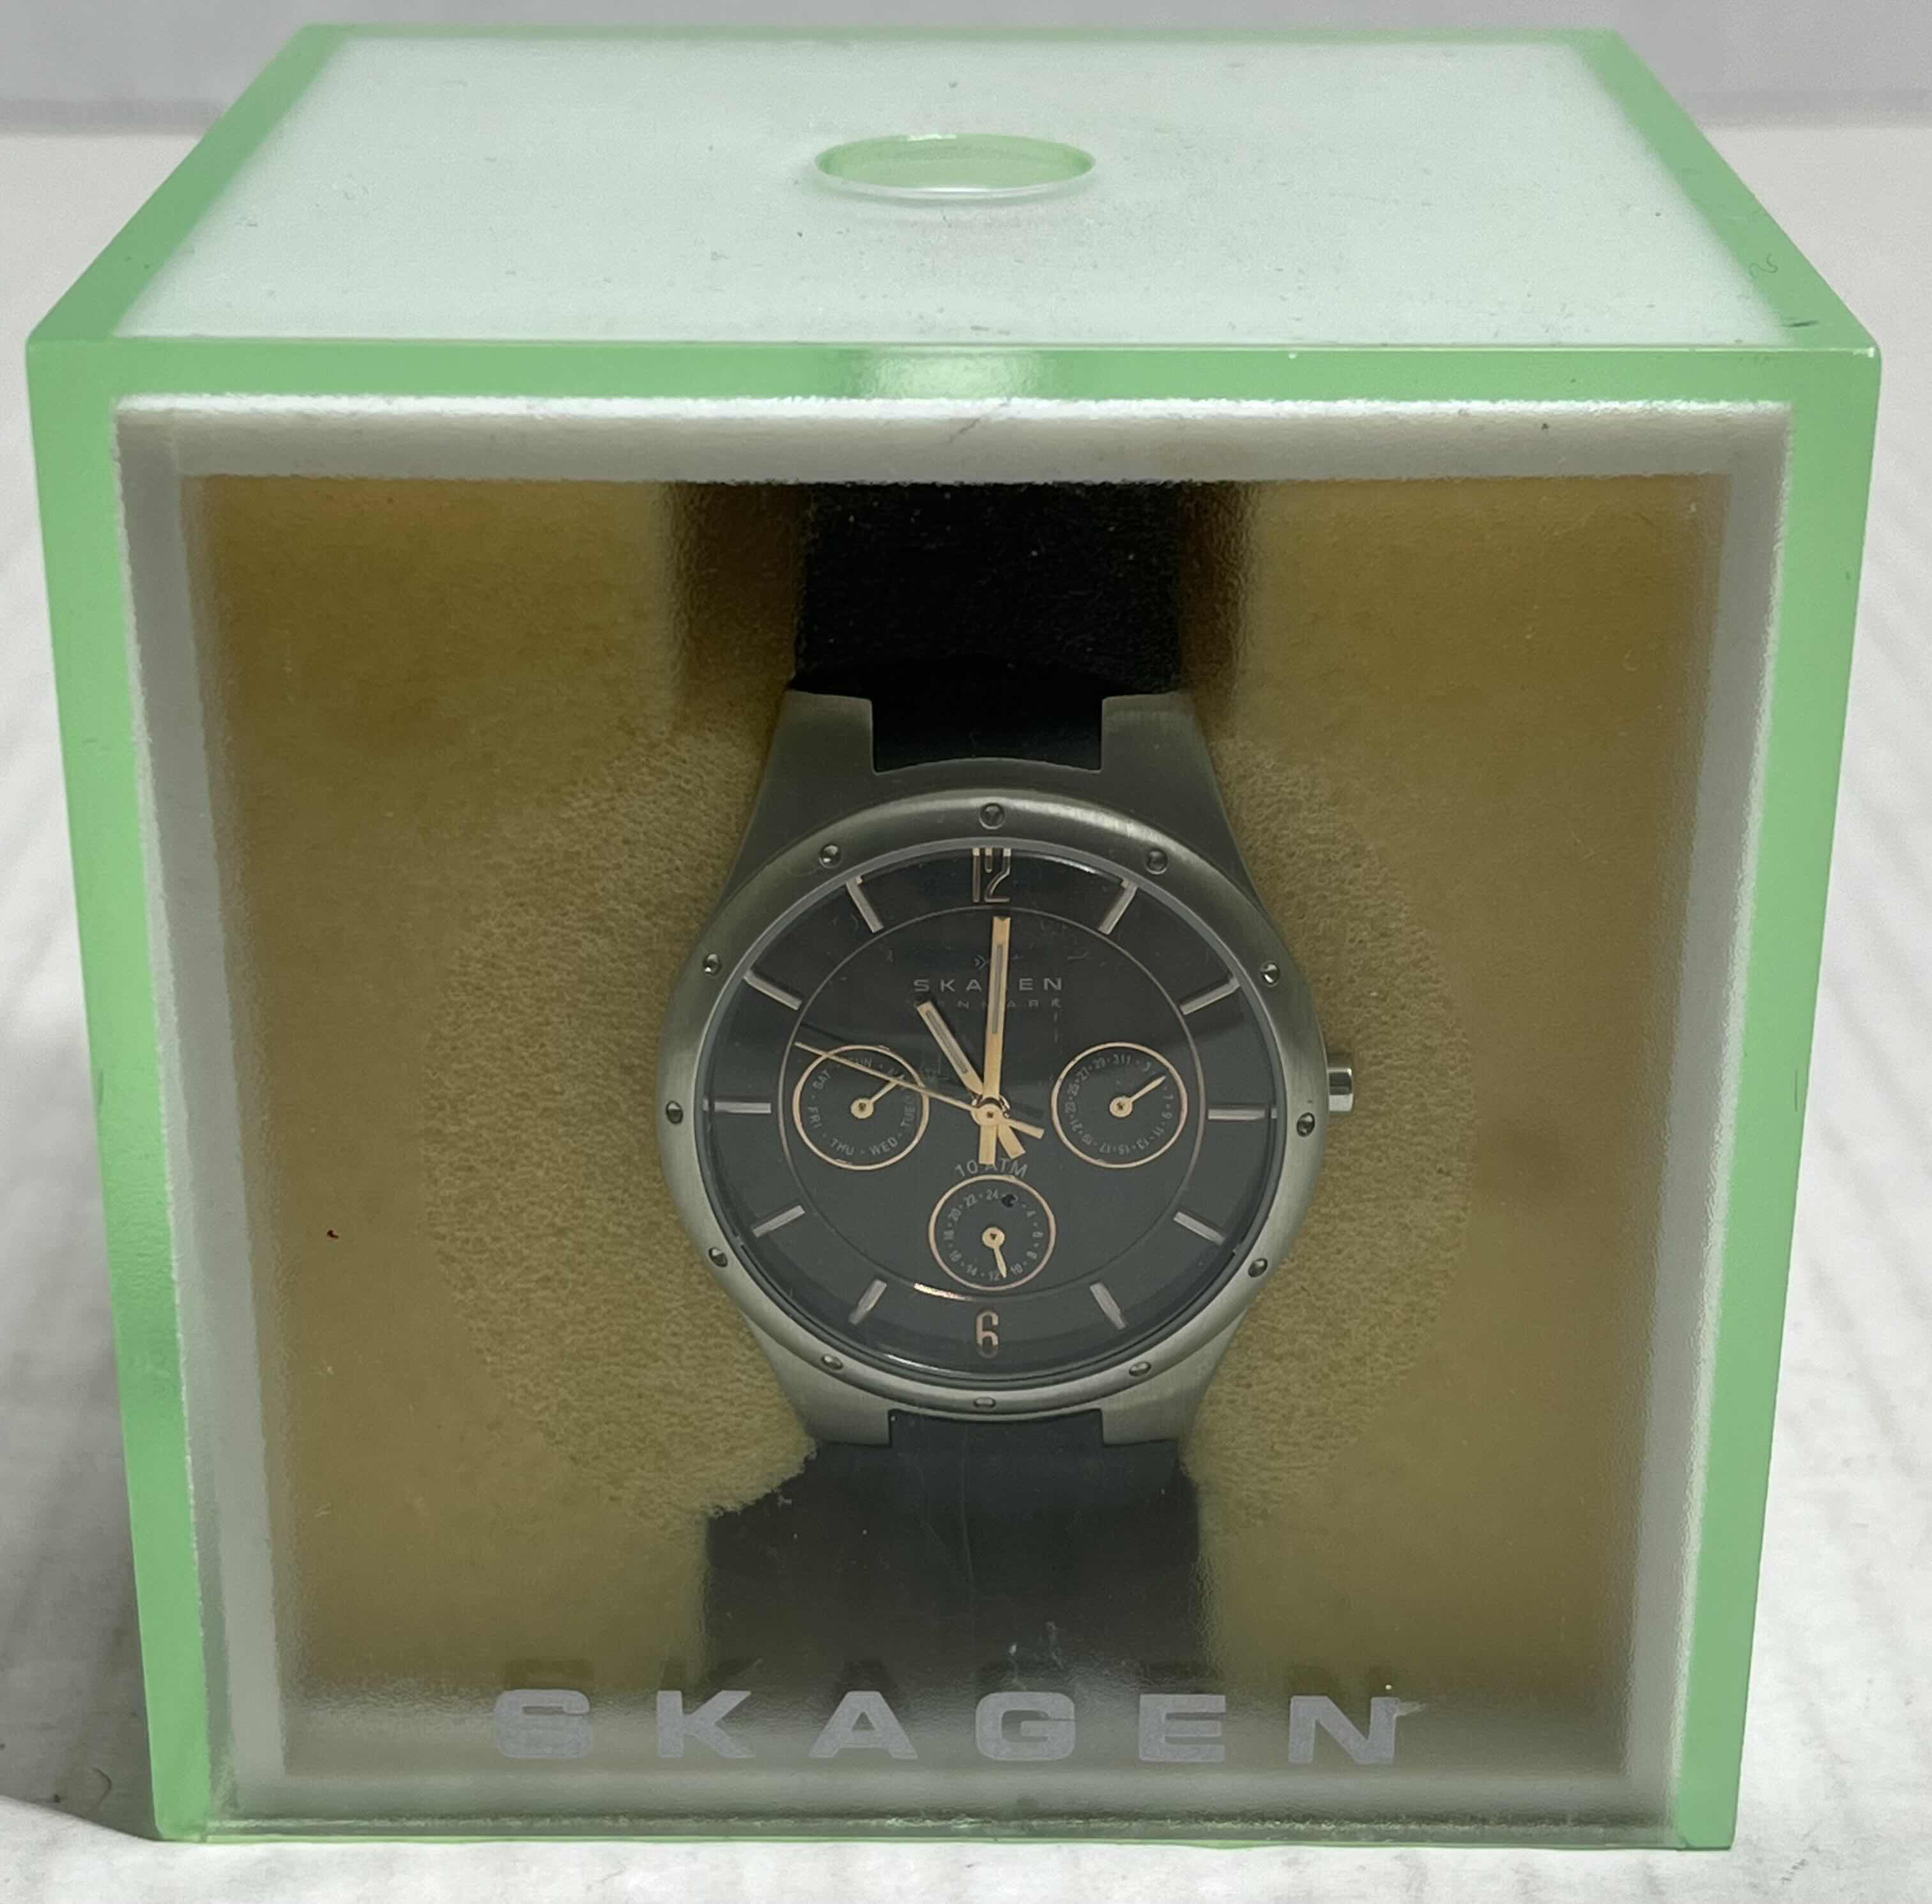 Photo 2 of SKAGEN DENMARK BRUSHED STAINLESS STEEL ACCENTED GOLD FINISH W RUBBER BAND WOMENS ANALOG WATCH MODEL 377LSRBO